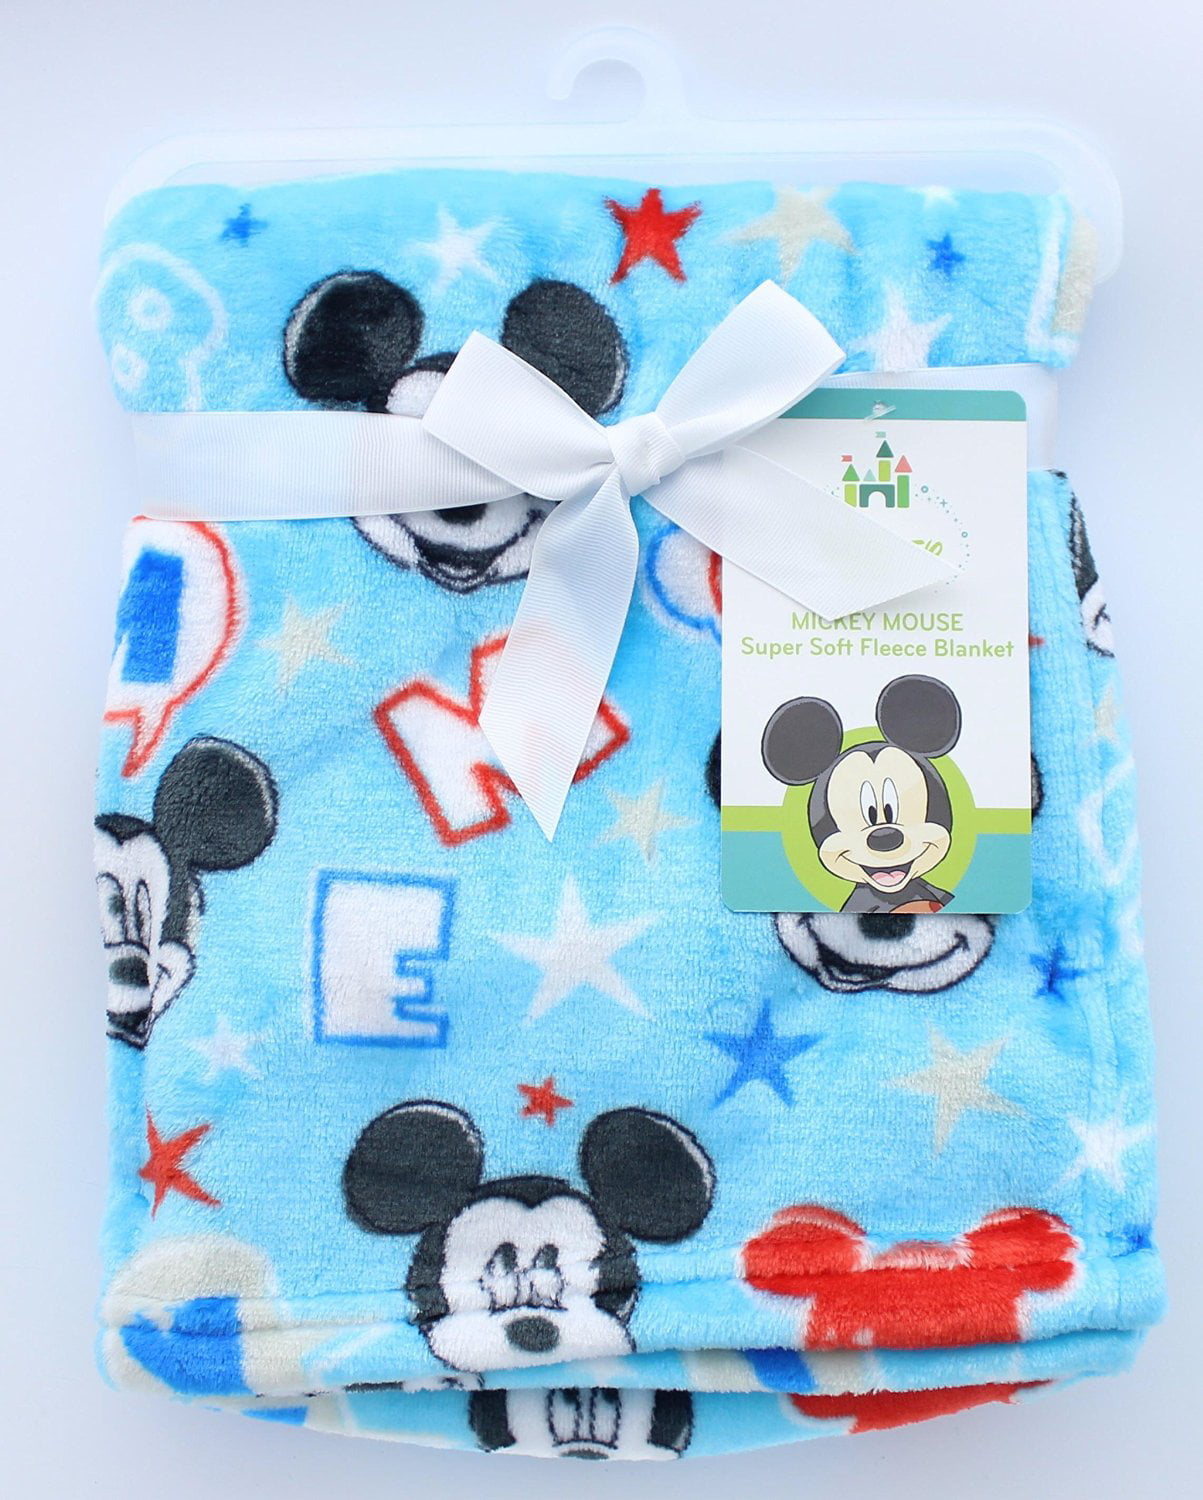 Personalised fleece baby blanket with Baby Mickey Mouse optional contrast edging 